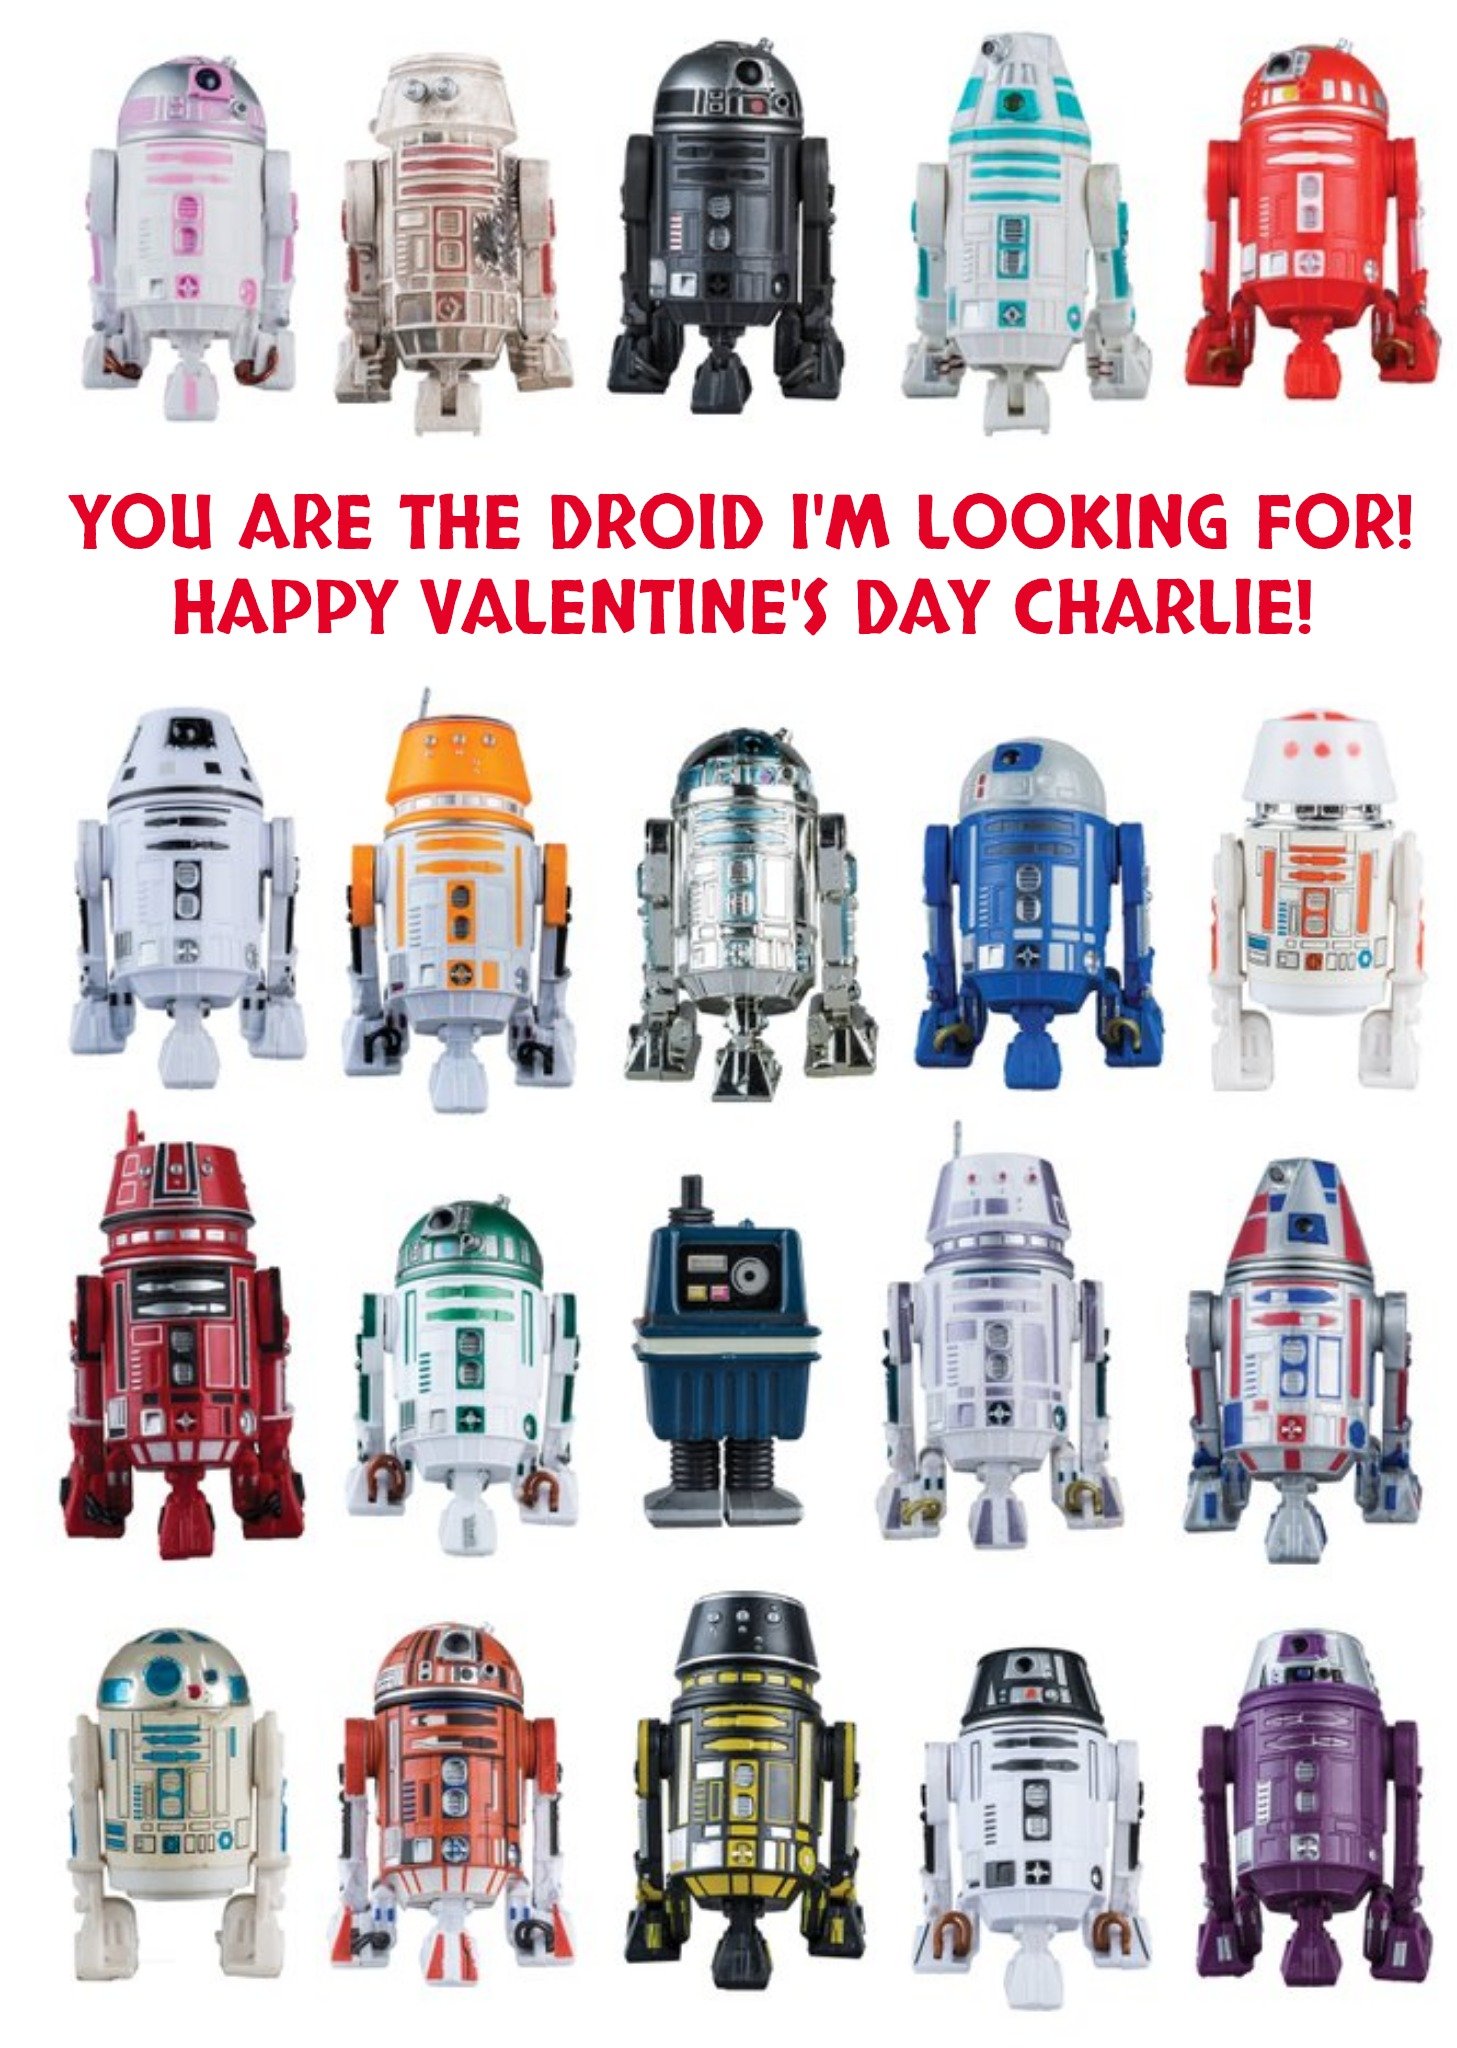 Disney Star Wars You Arethe Droid I'm Looking For Valentine's Day Card, Large